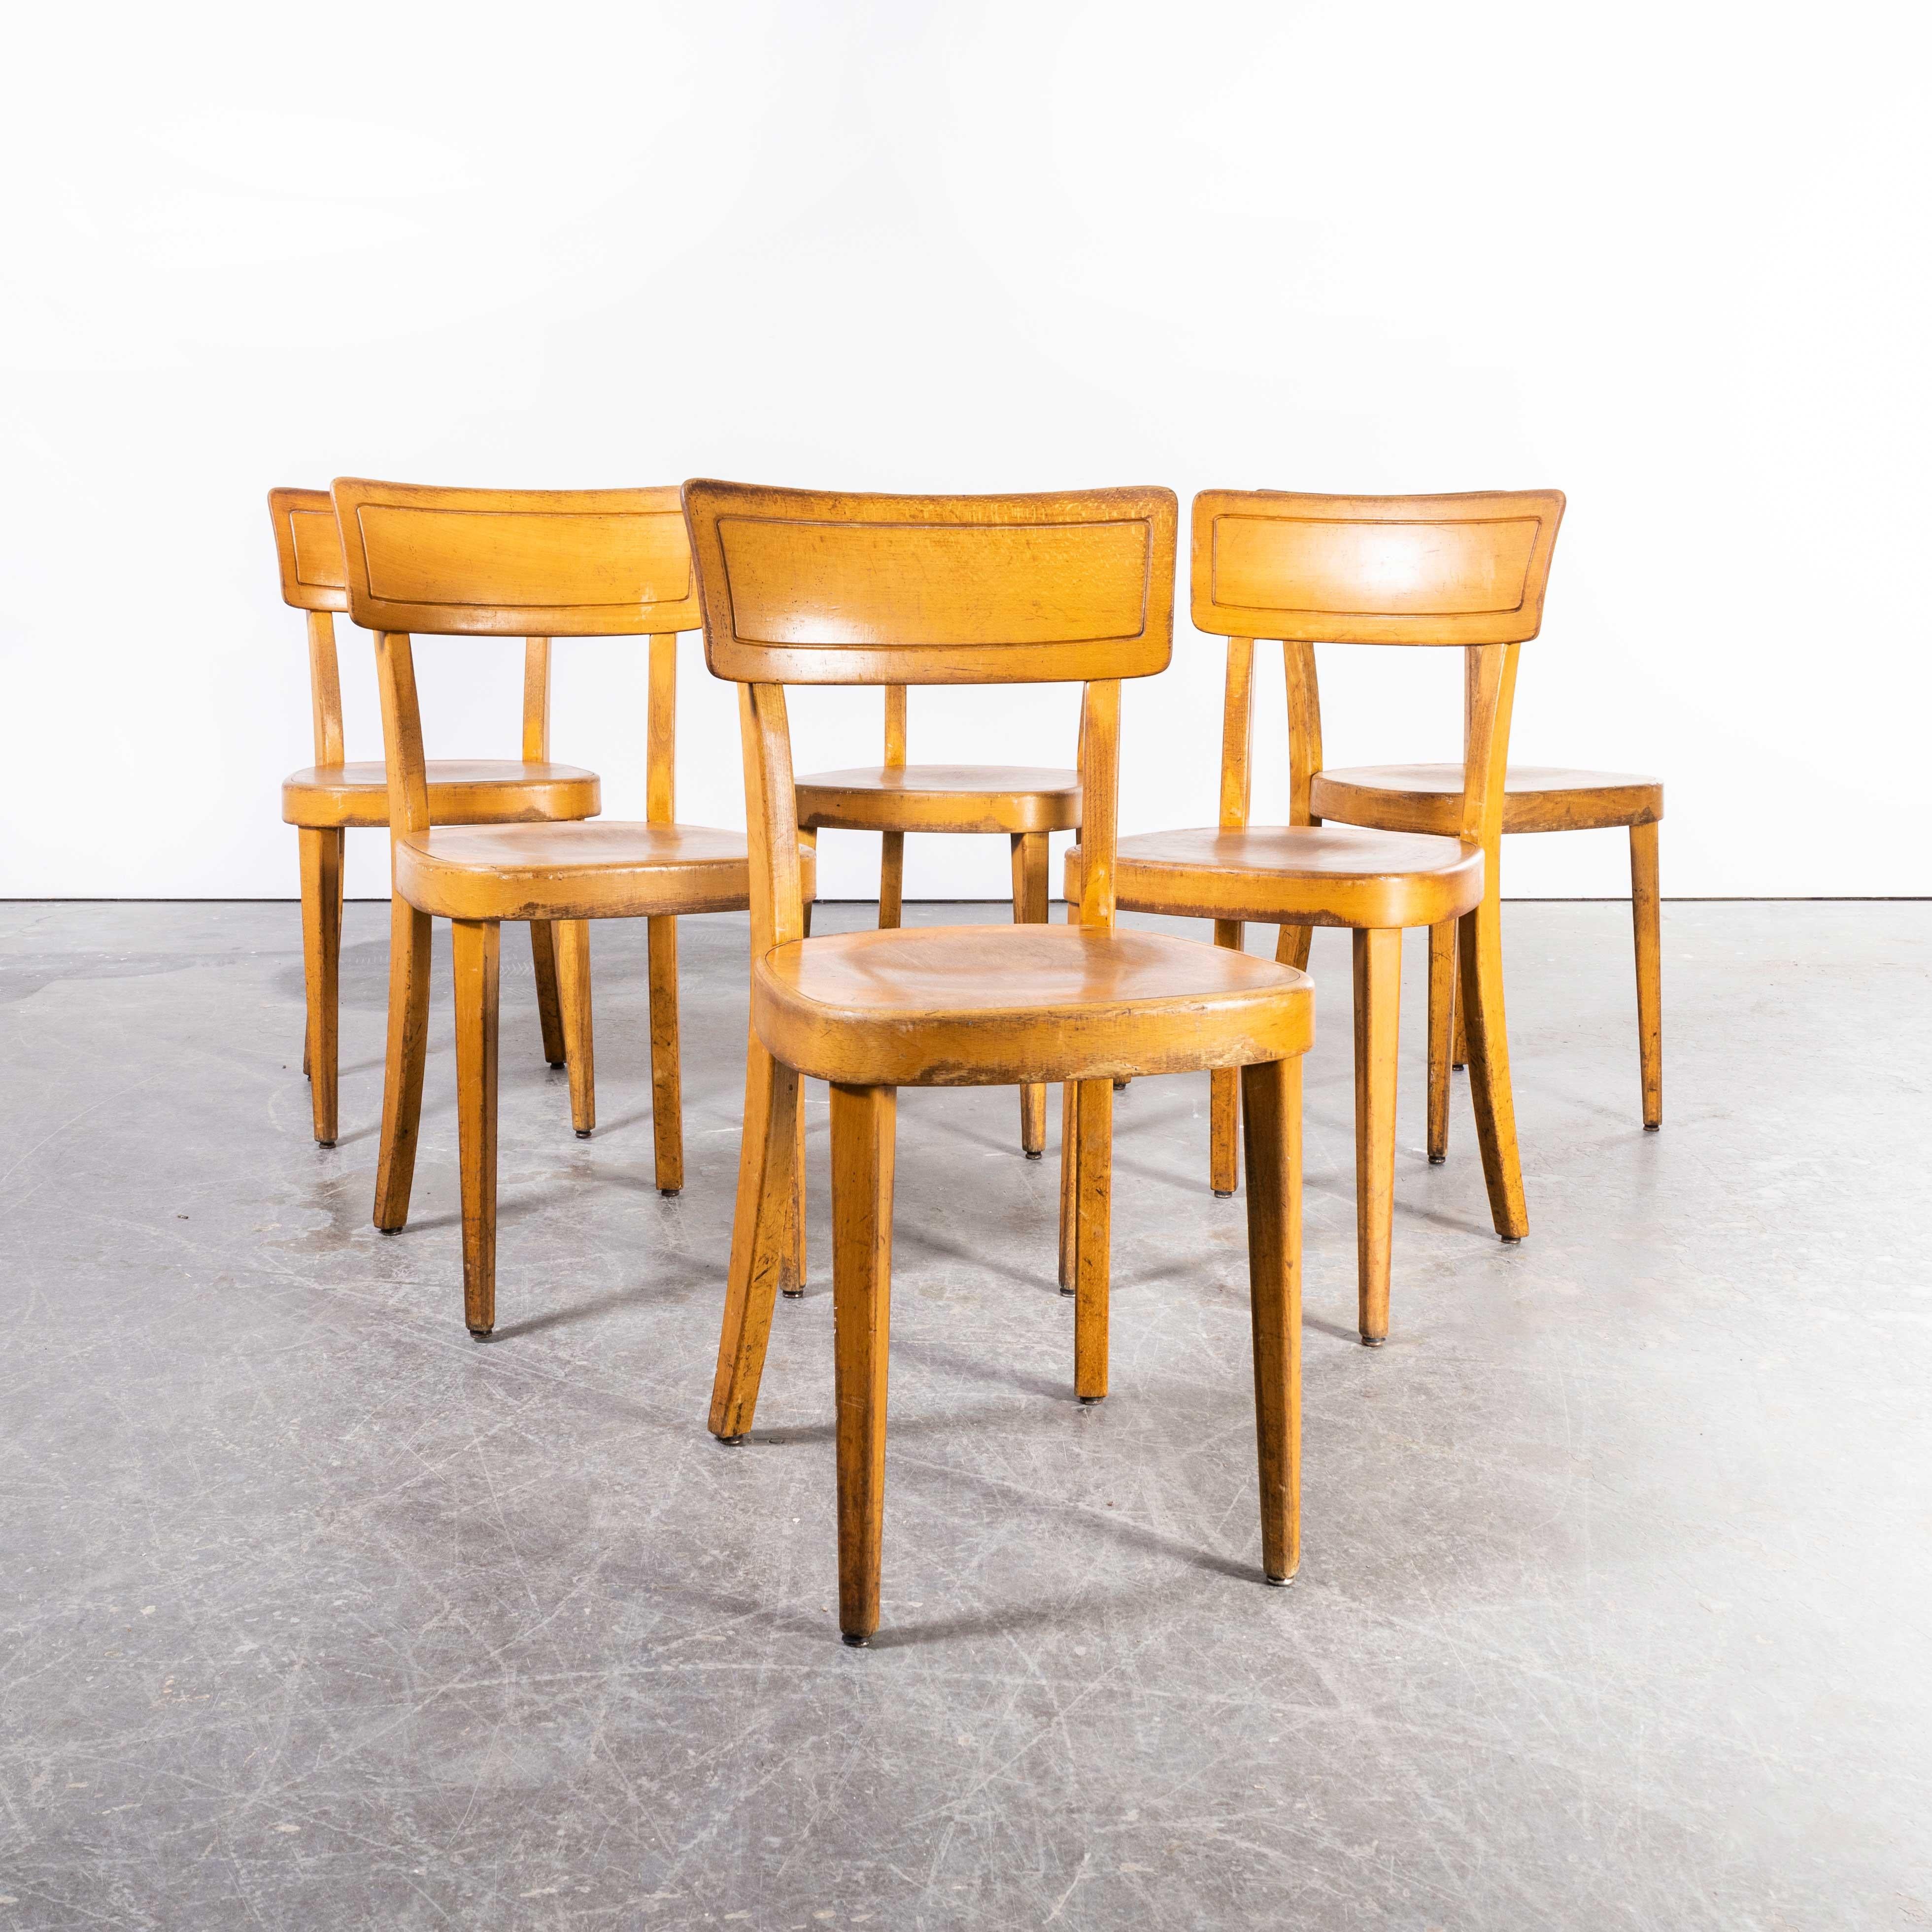 1960's Horgen Glarus Beech Saddle Back Dining Chairs - Set of Six For Sale 3